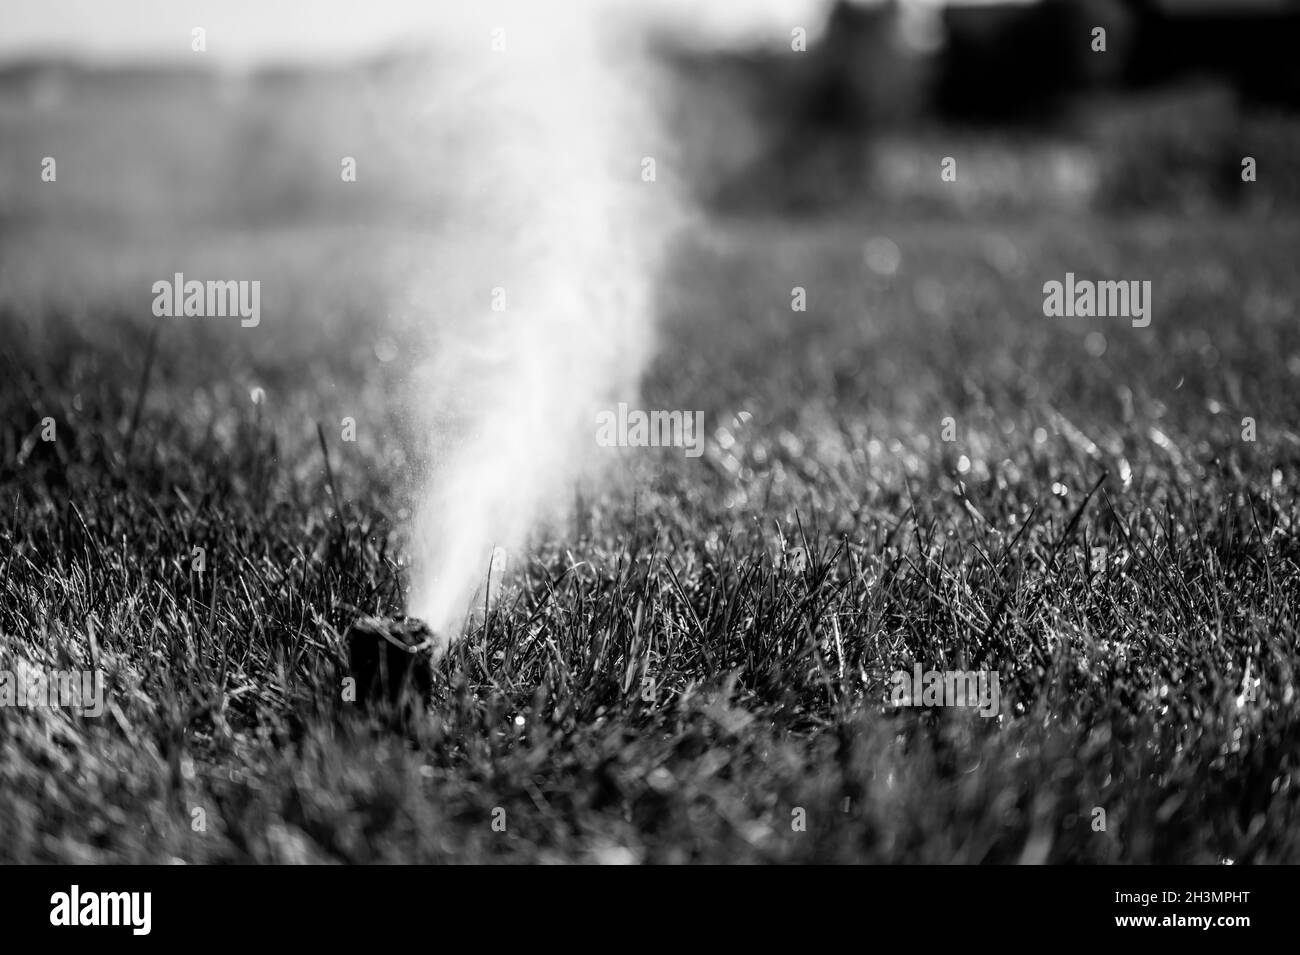 winterizing a irrigation sprinkler system by blowing pressurized air through to clear out water Stock Photo